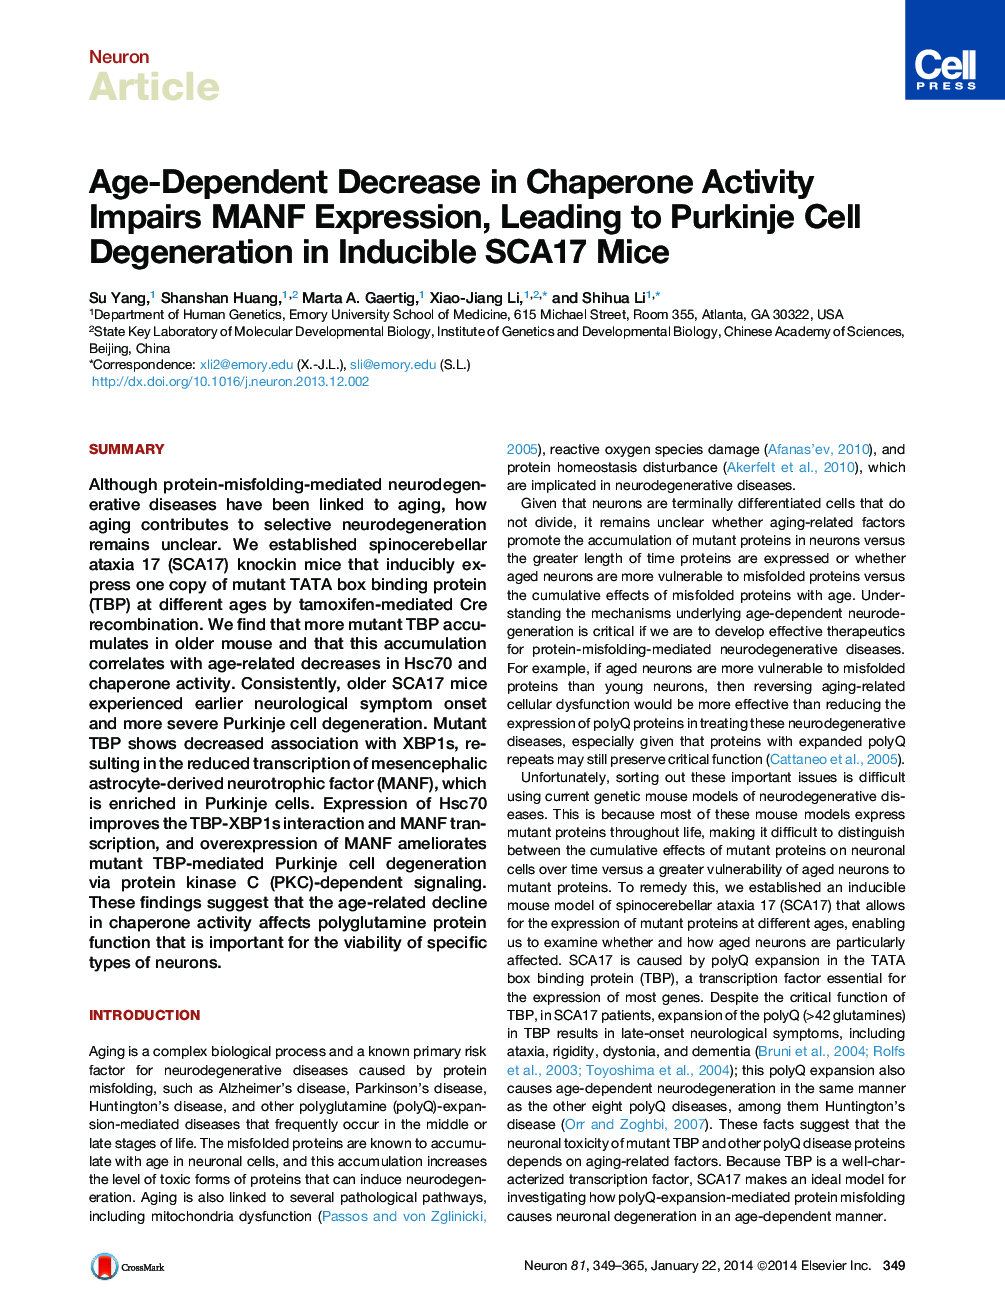 Age-Dependent Decrease in Chaperone Activity Impairs MANF Expression, Leading to Purkinje Cell Degeneration in Inducible SCA17 Mice